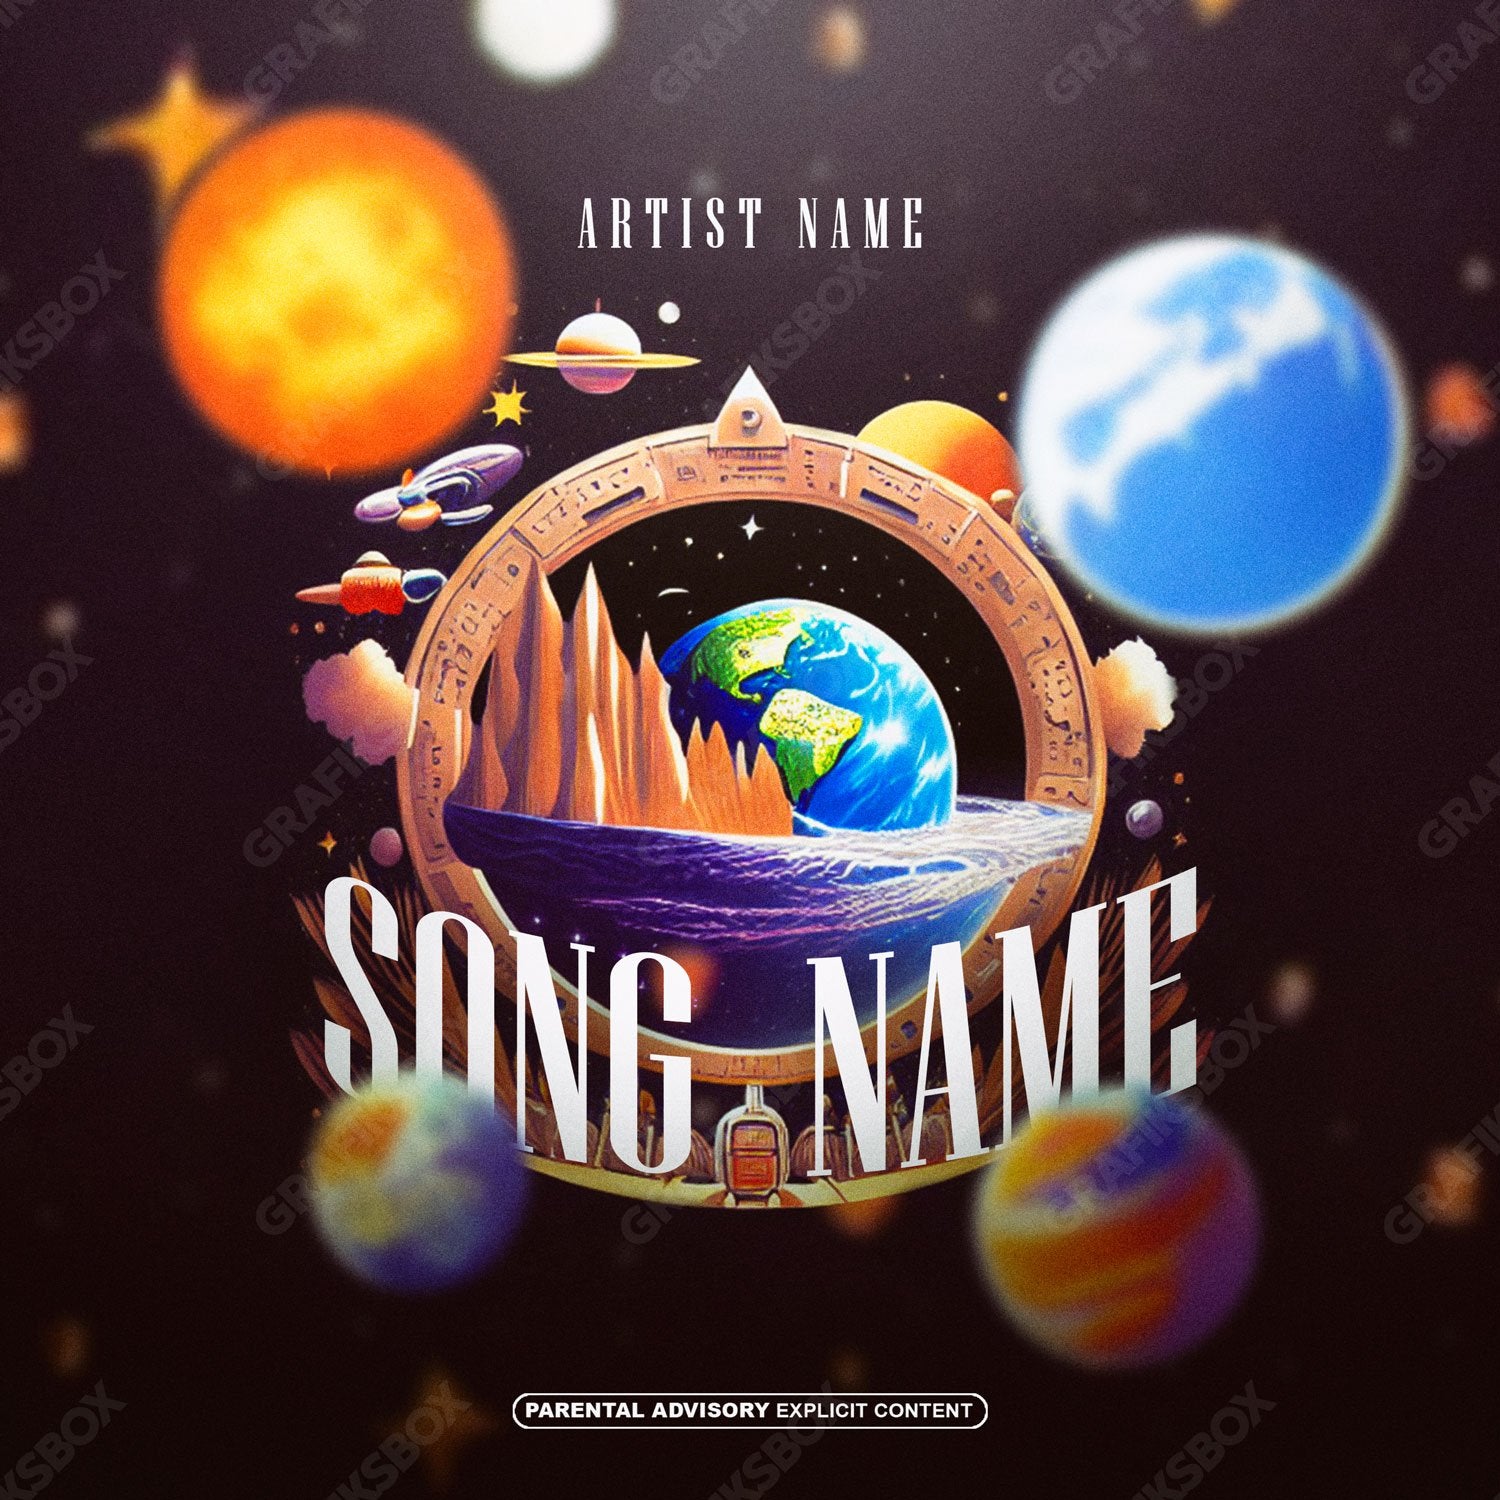 Galactic premade cover art